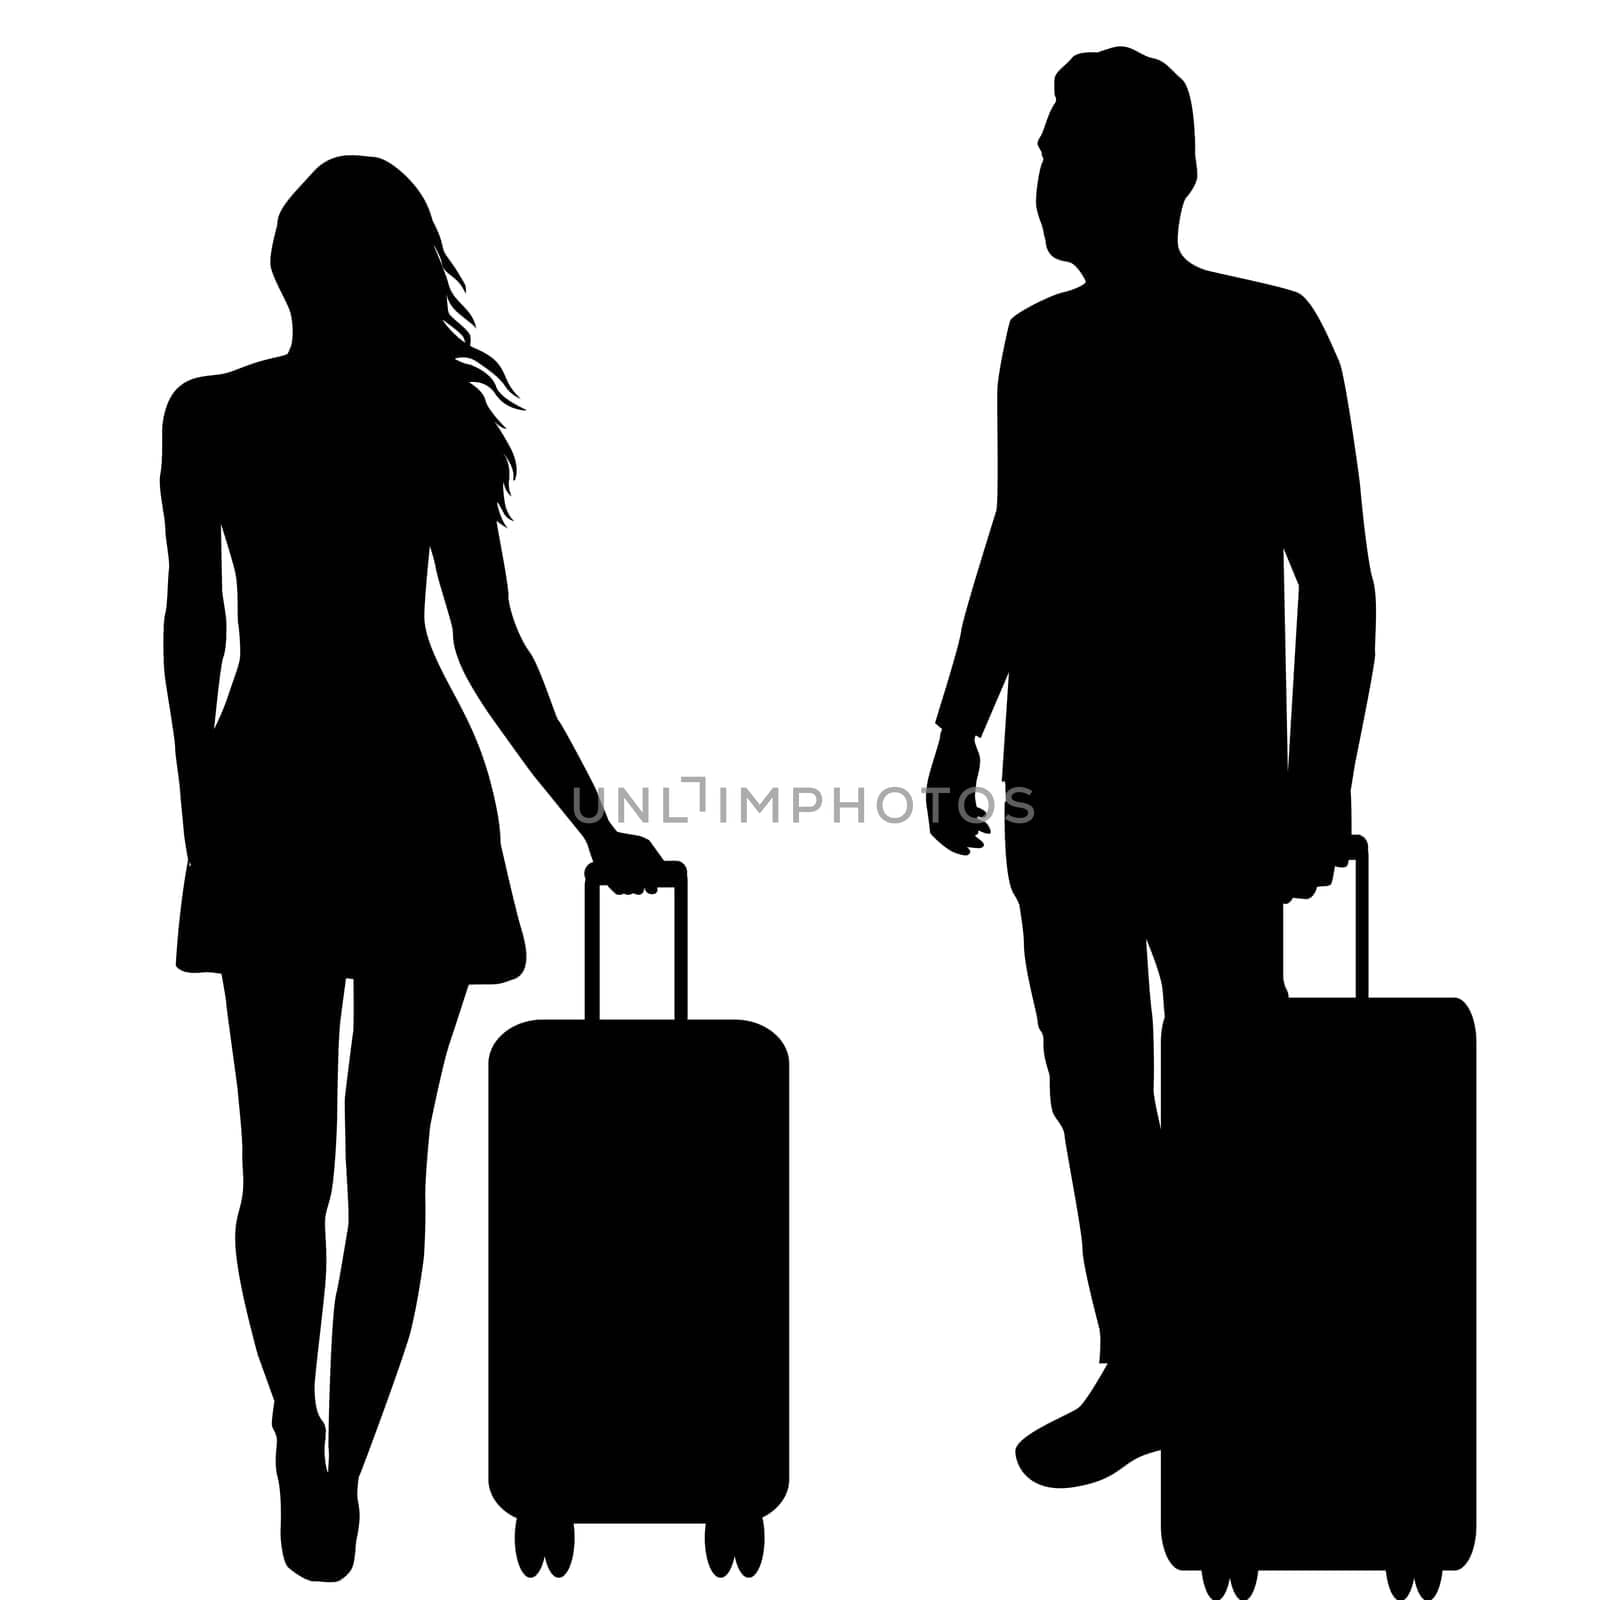 Silhouettes of a woman and a man with suitcases on wheels